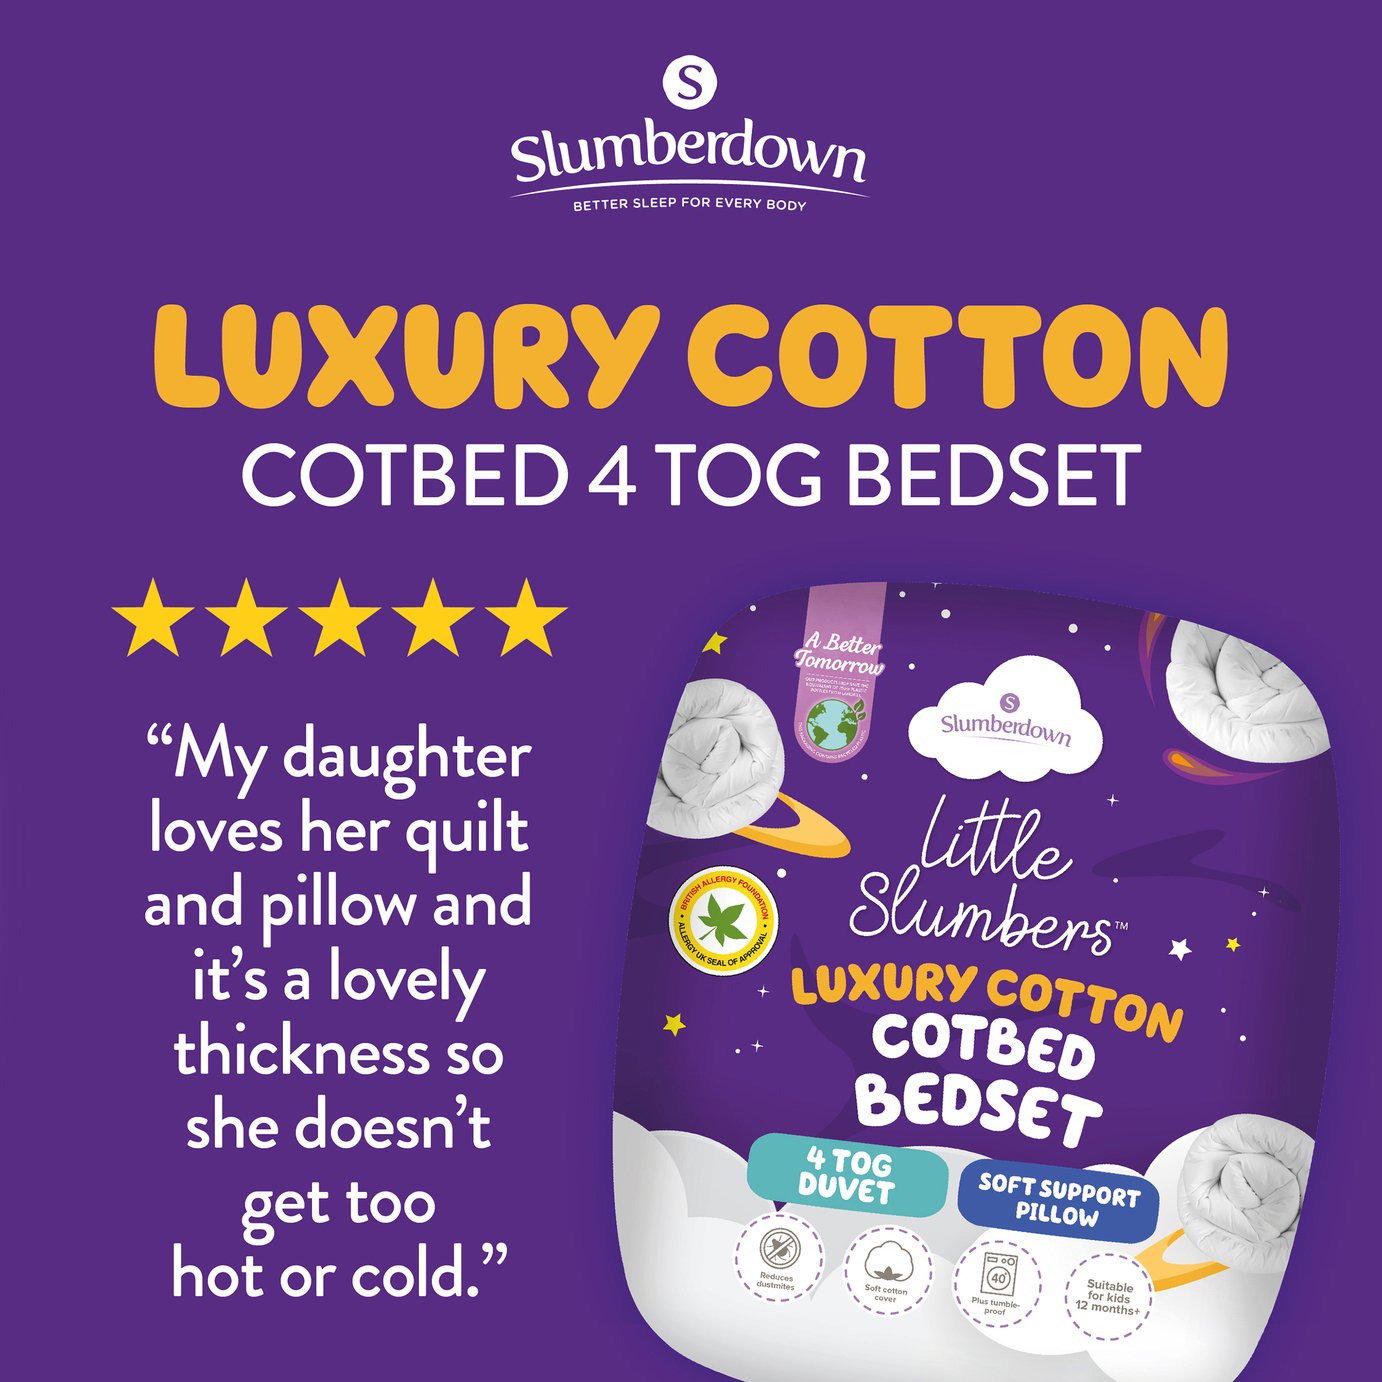 Little Slumbers Allergy Protection 4 Tog Bedset Review